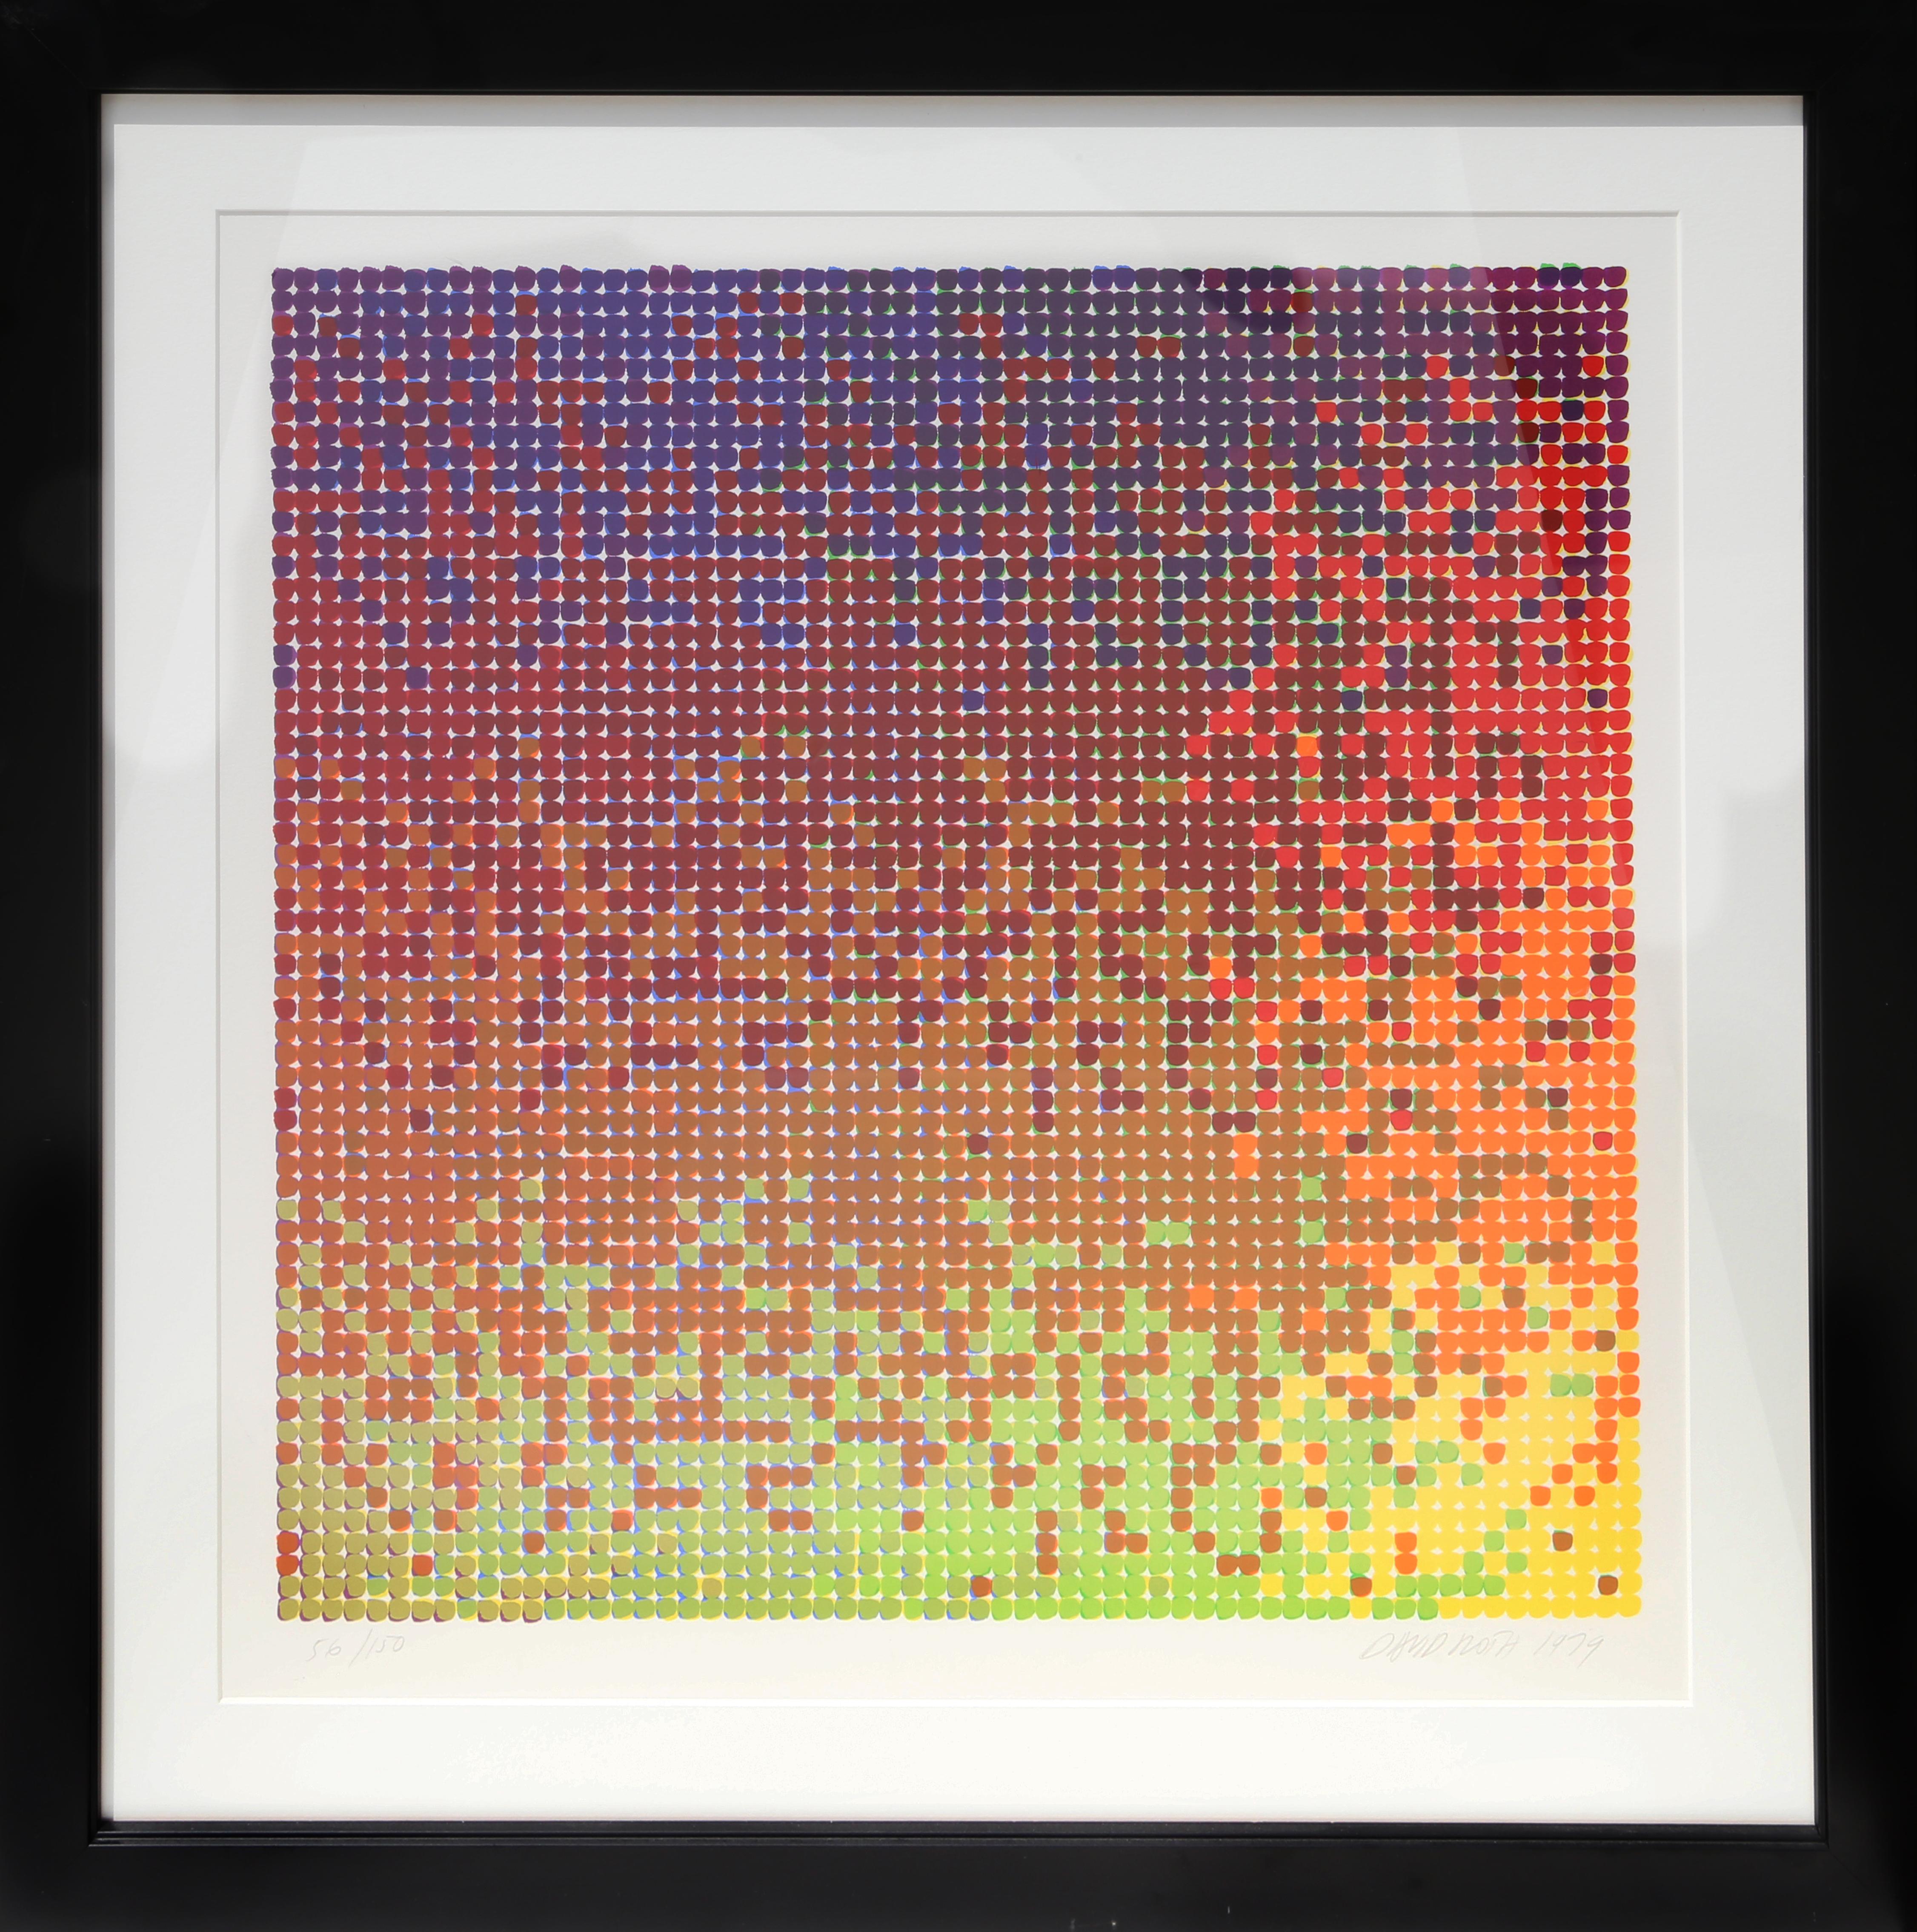 Luminous Op Art print by David Roth. Nicely matted and framed in black.

Untitled 25
David Roth, American (1942)
Date: 1979
Screenprint, signed and numbered in pencil
Edition of 150
Image Size: 23 x 23 inches
Size: 29 x 29 in. (73.66 x 73.66